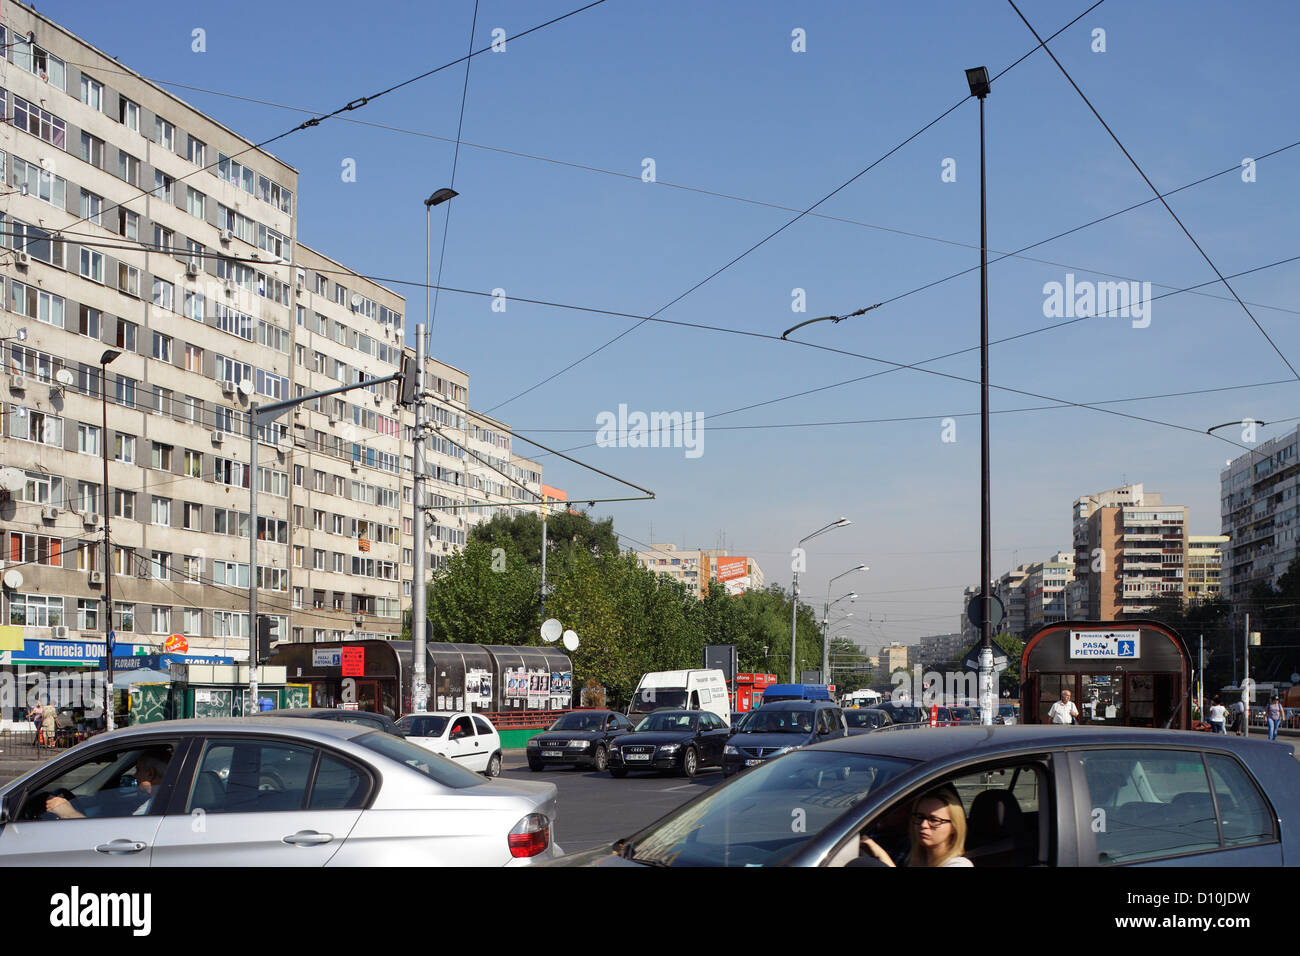 Bucharest, Romania, traffic intersection in a residential area on Piata Obor Stock Photo